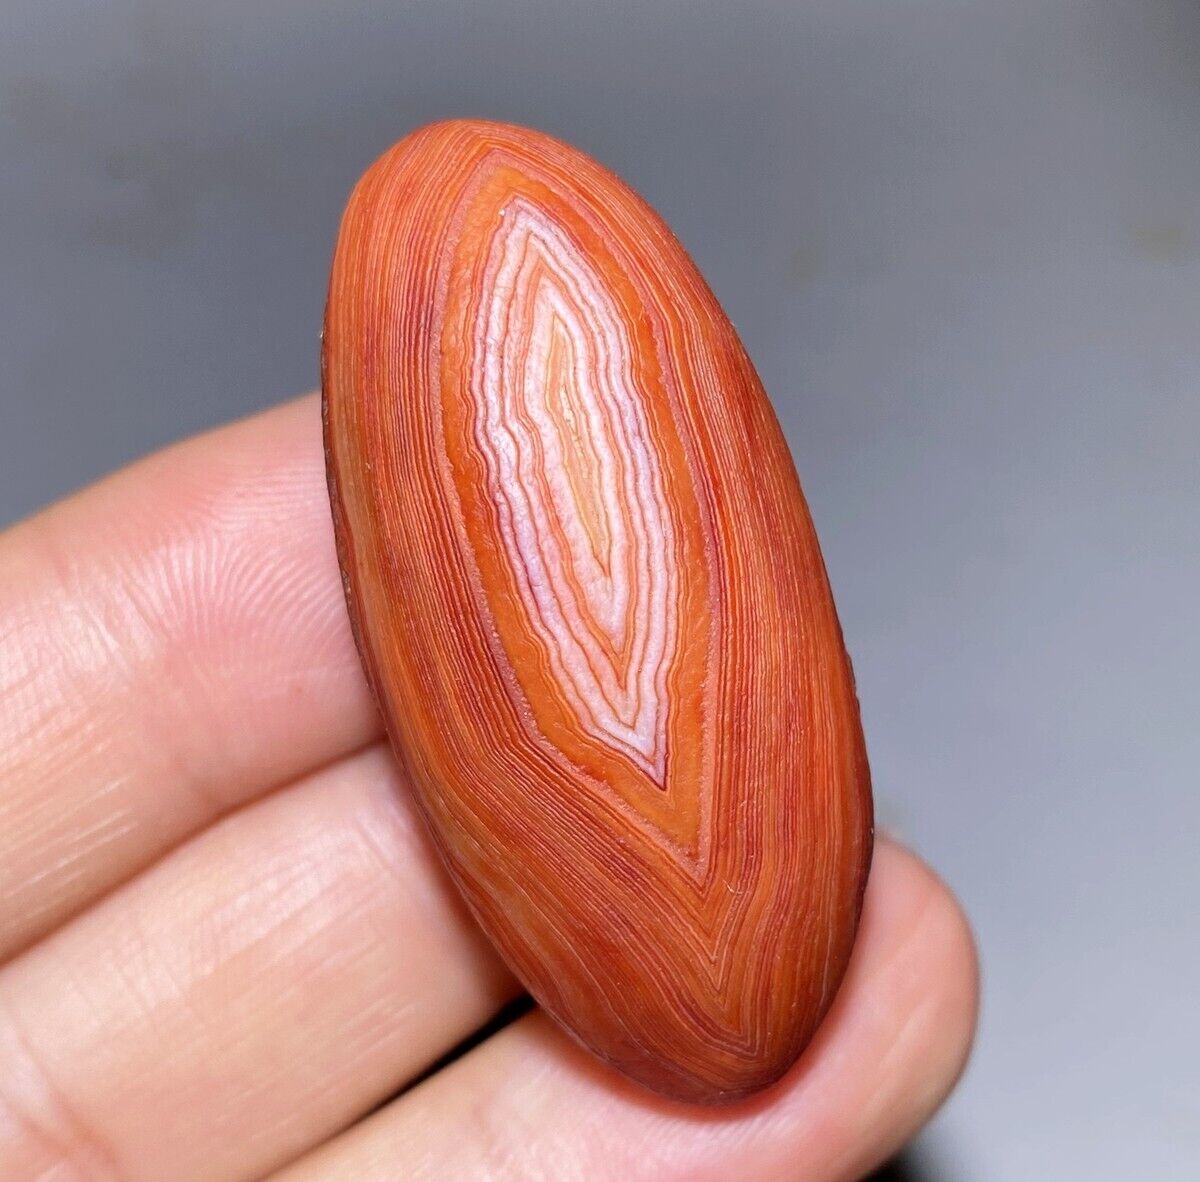 Certified Natural Gobi Agate Eyes Agate/Rough stone Pendant Collection Specimen